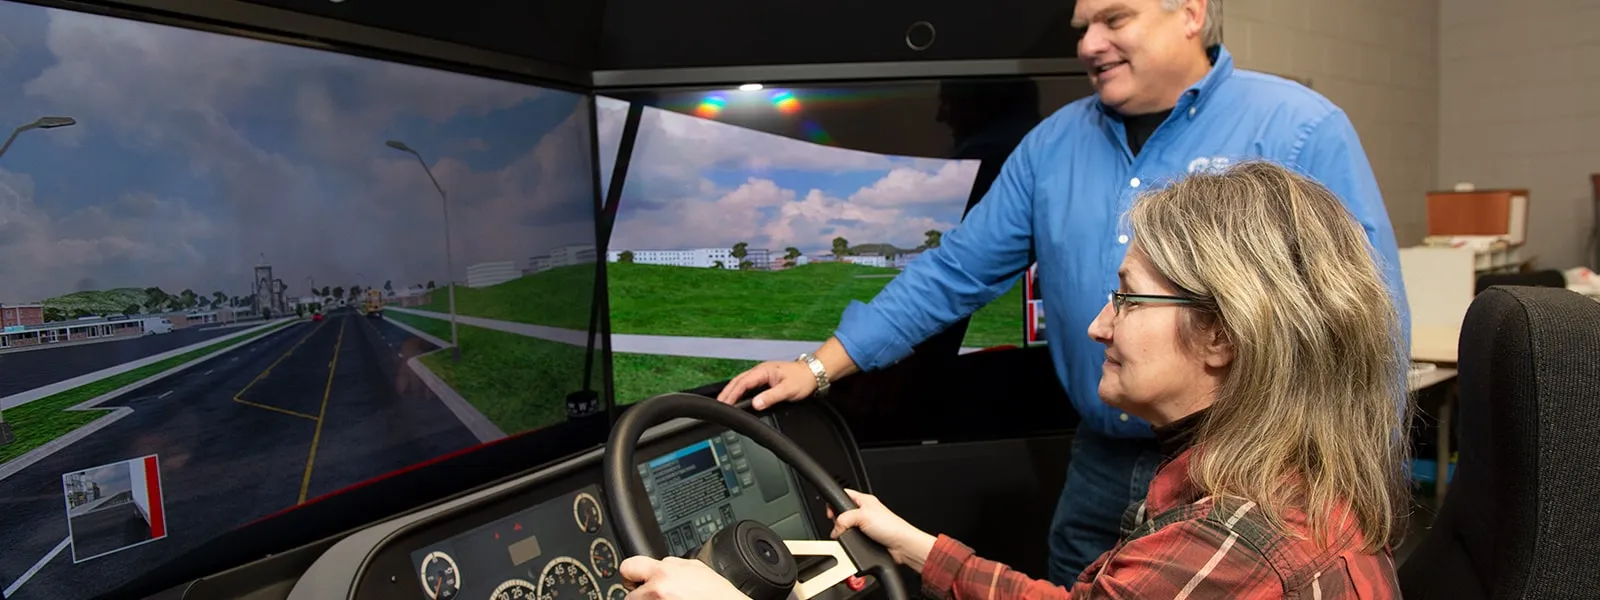 Image of student and instructor using simulator